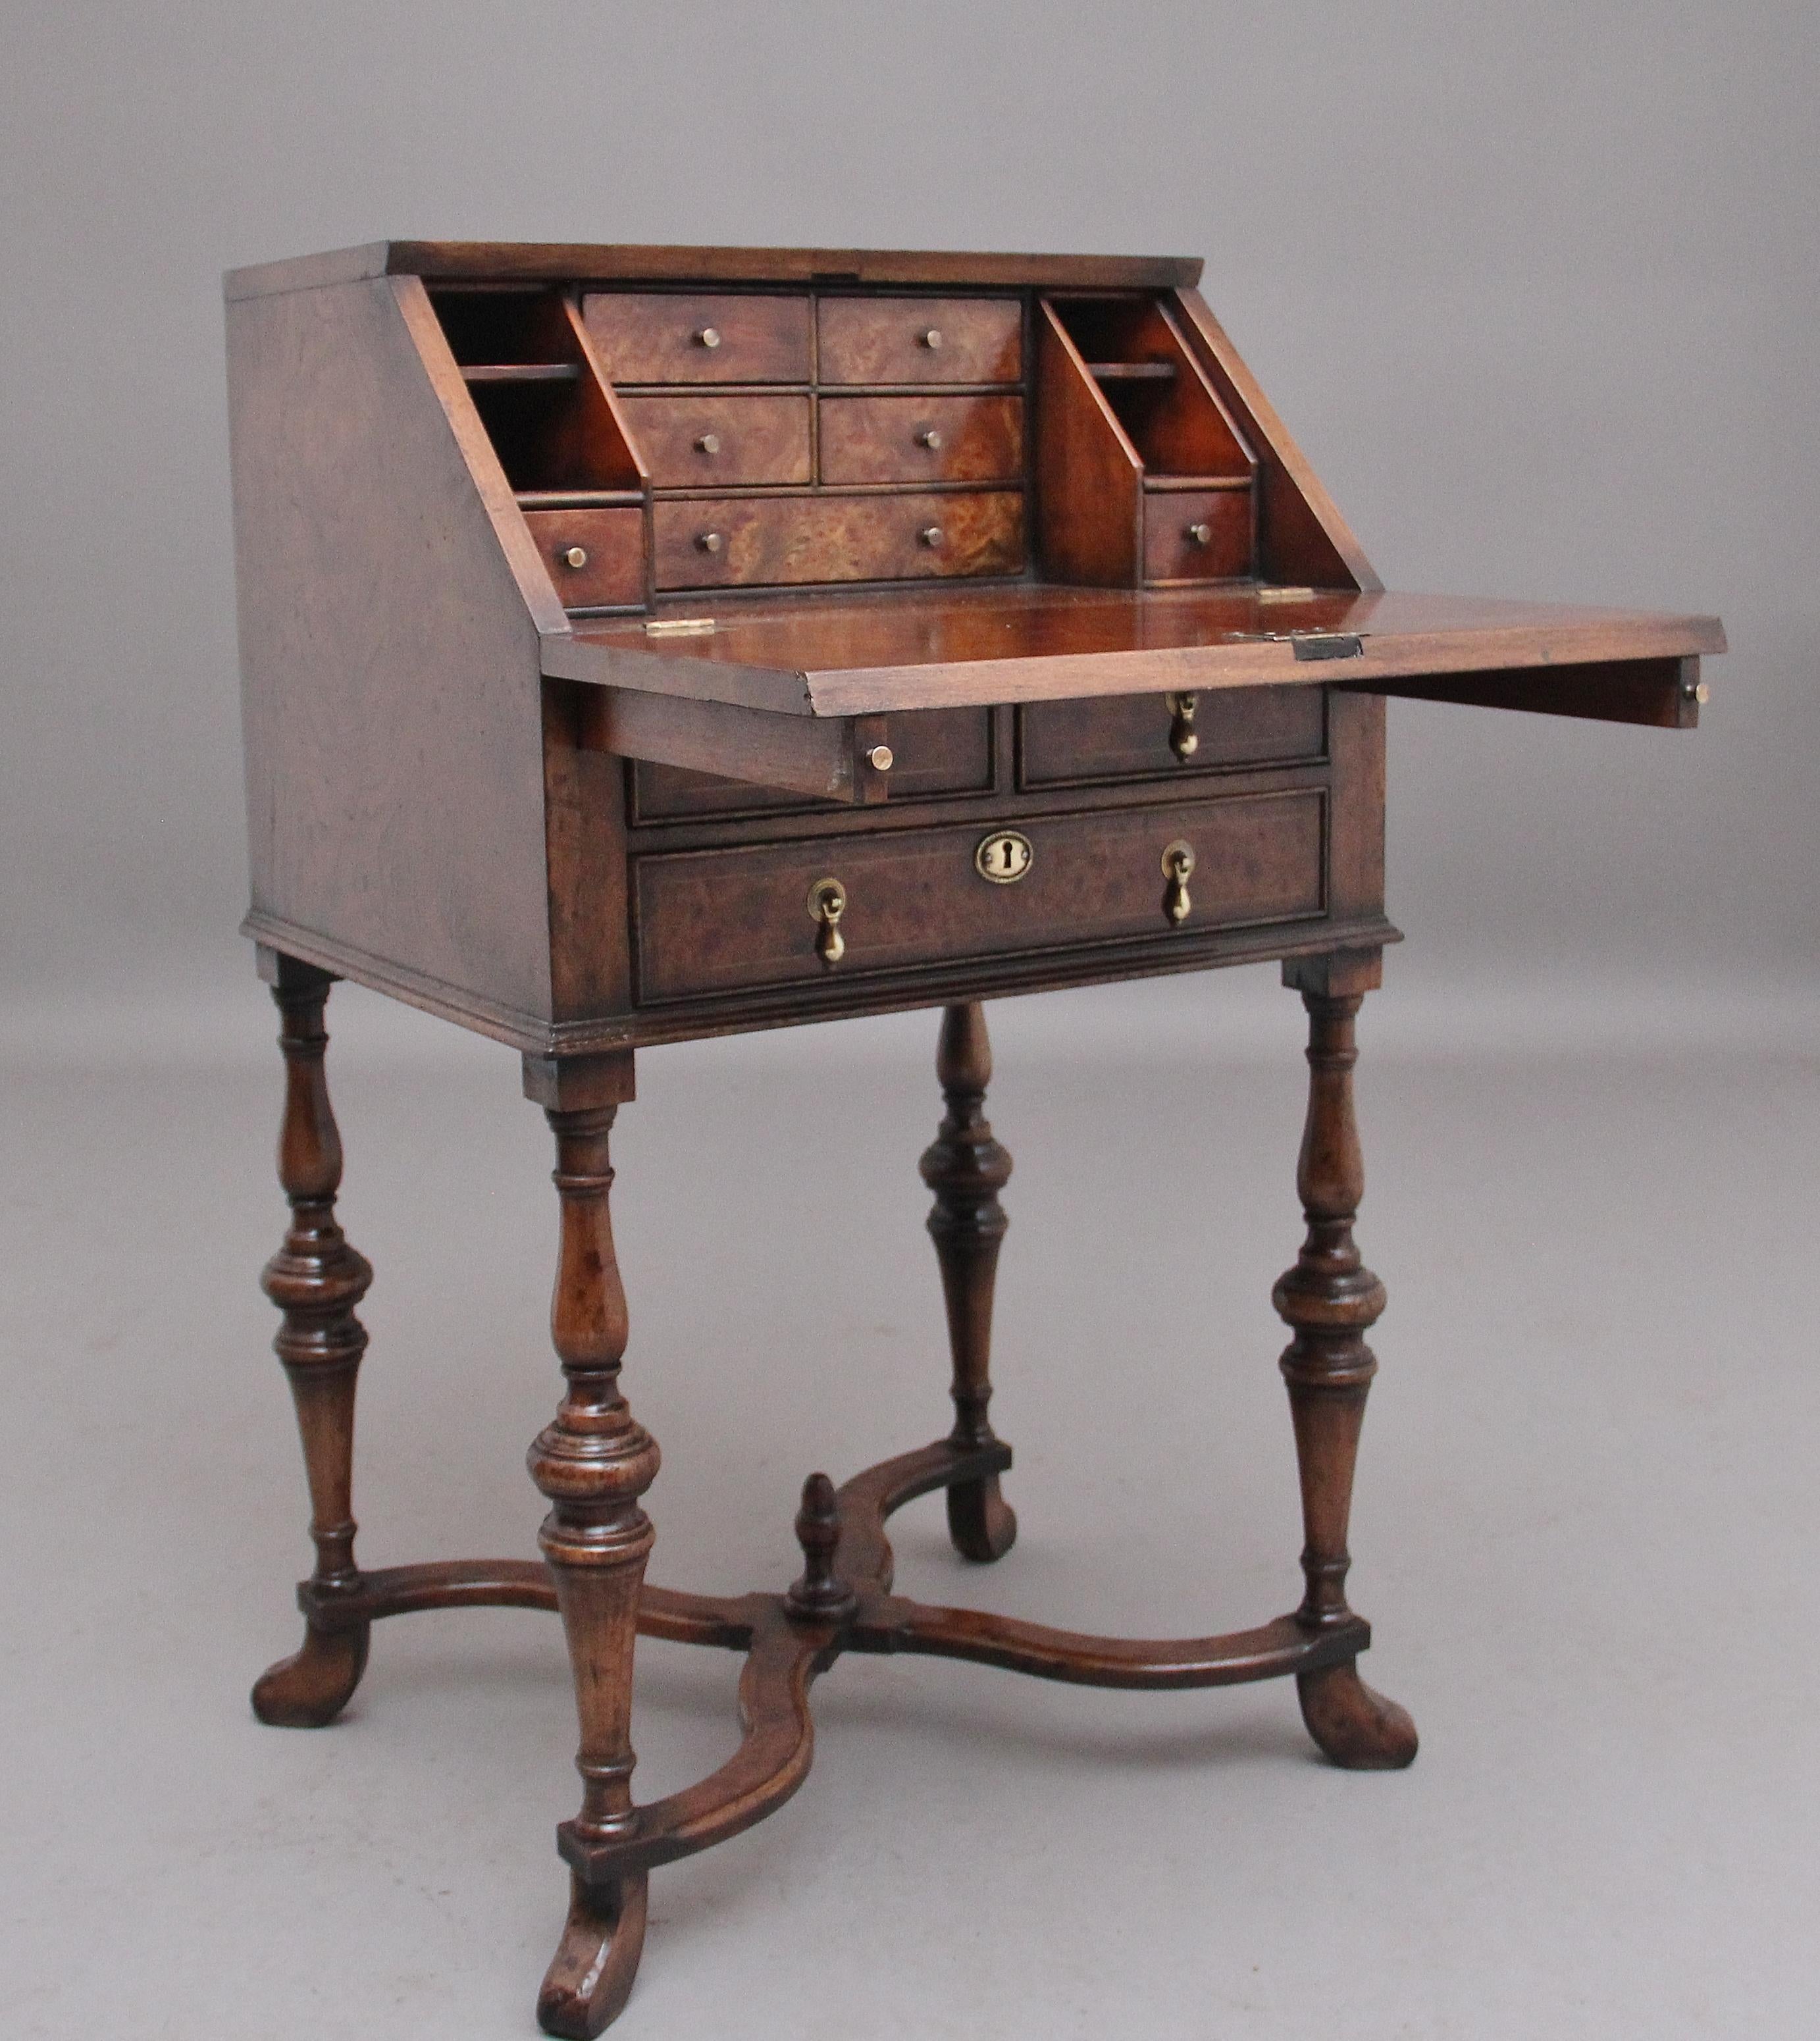 Early 20th Century walnut and elm bureau in in the Queen Anne style, having a lovely figured and inlaid fall which opens to reveal various drawers and compartments and a solid top writing surface, two short over one long drawer below with original